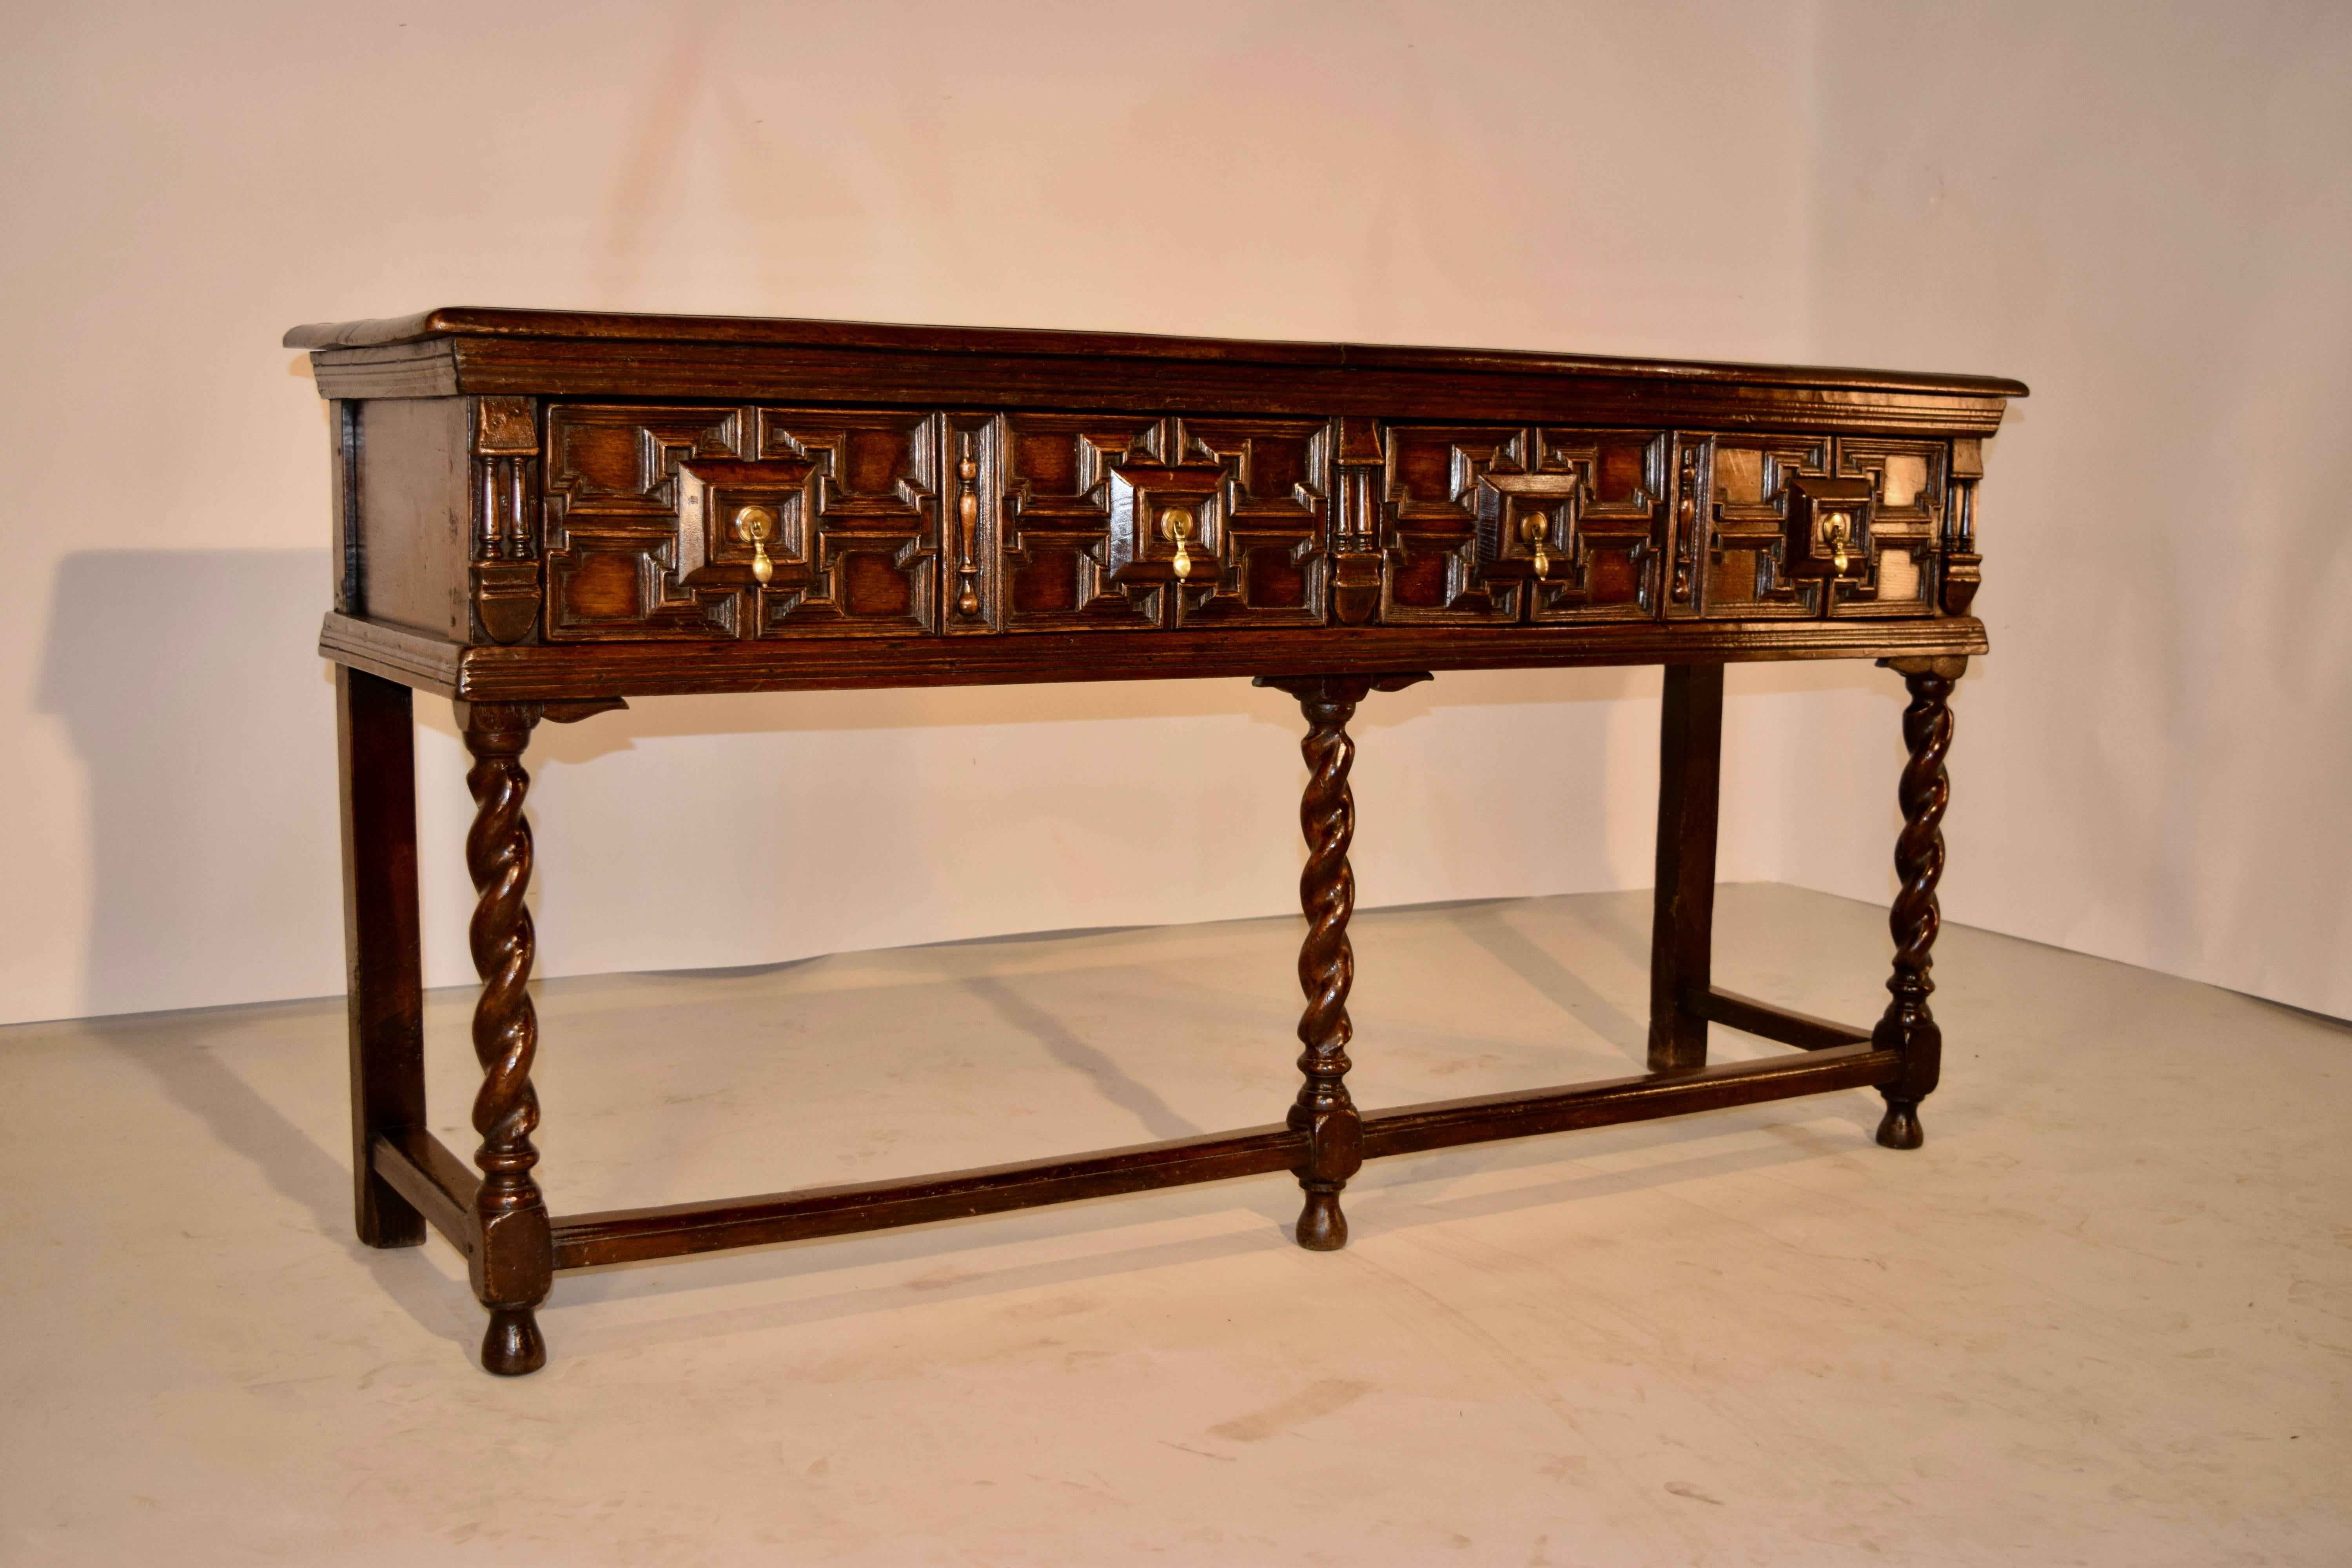 Early 19th century English oak sideboard with a two board top, which has a beveled edge and normal signs of wear. The case has paneled sides and two drawers in the front with geometric molded paneled drawer fronts. The front legs are hand-turned